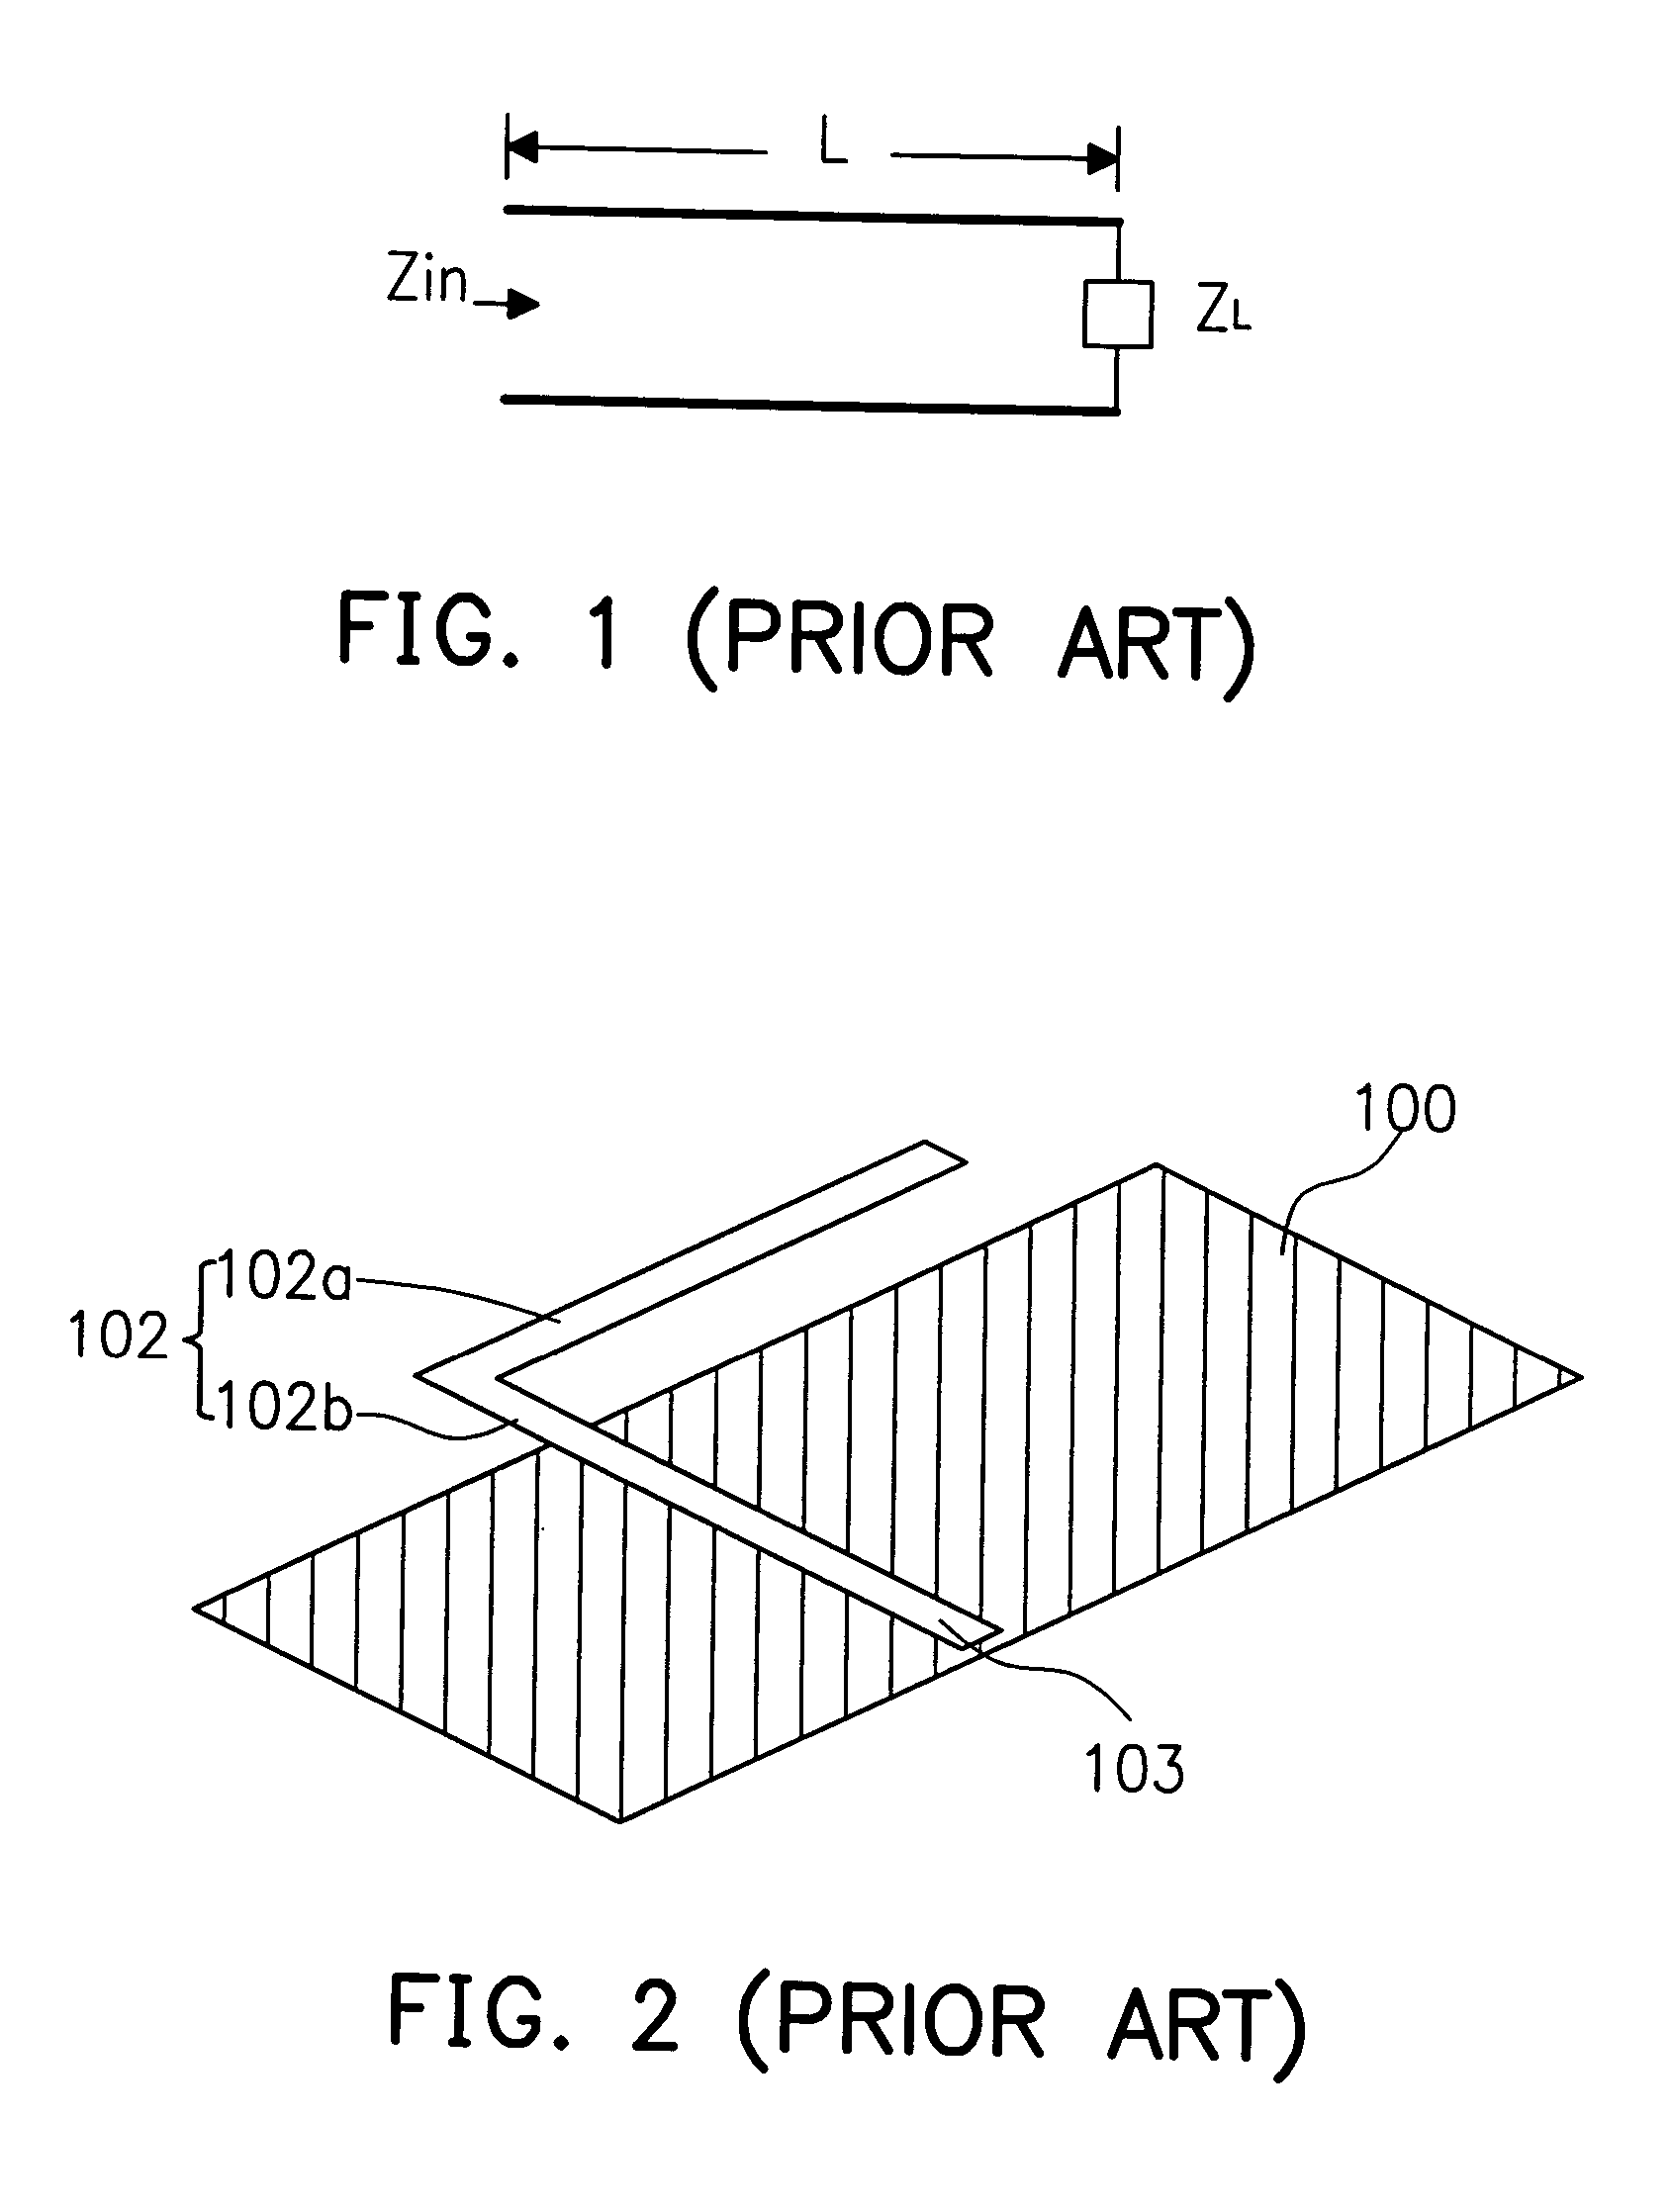 Antenna with printed compensating capacitor